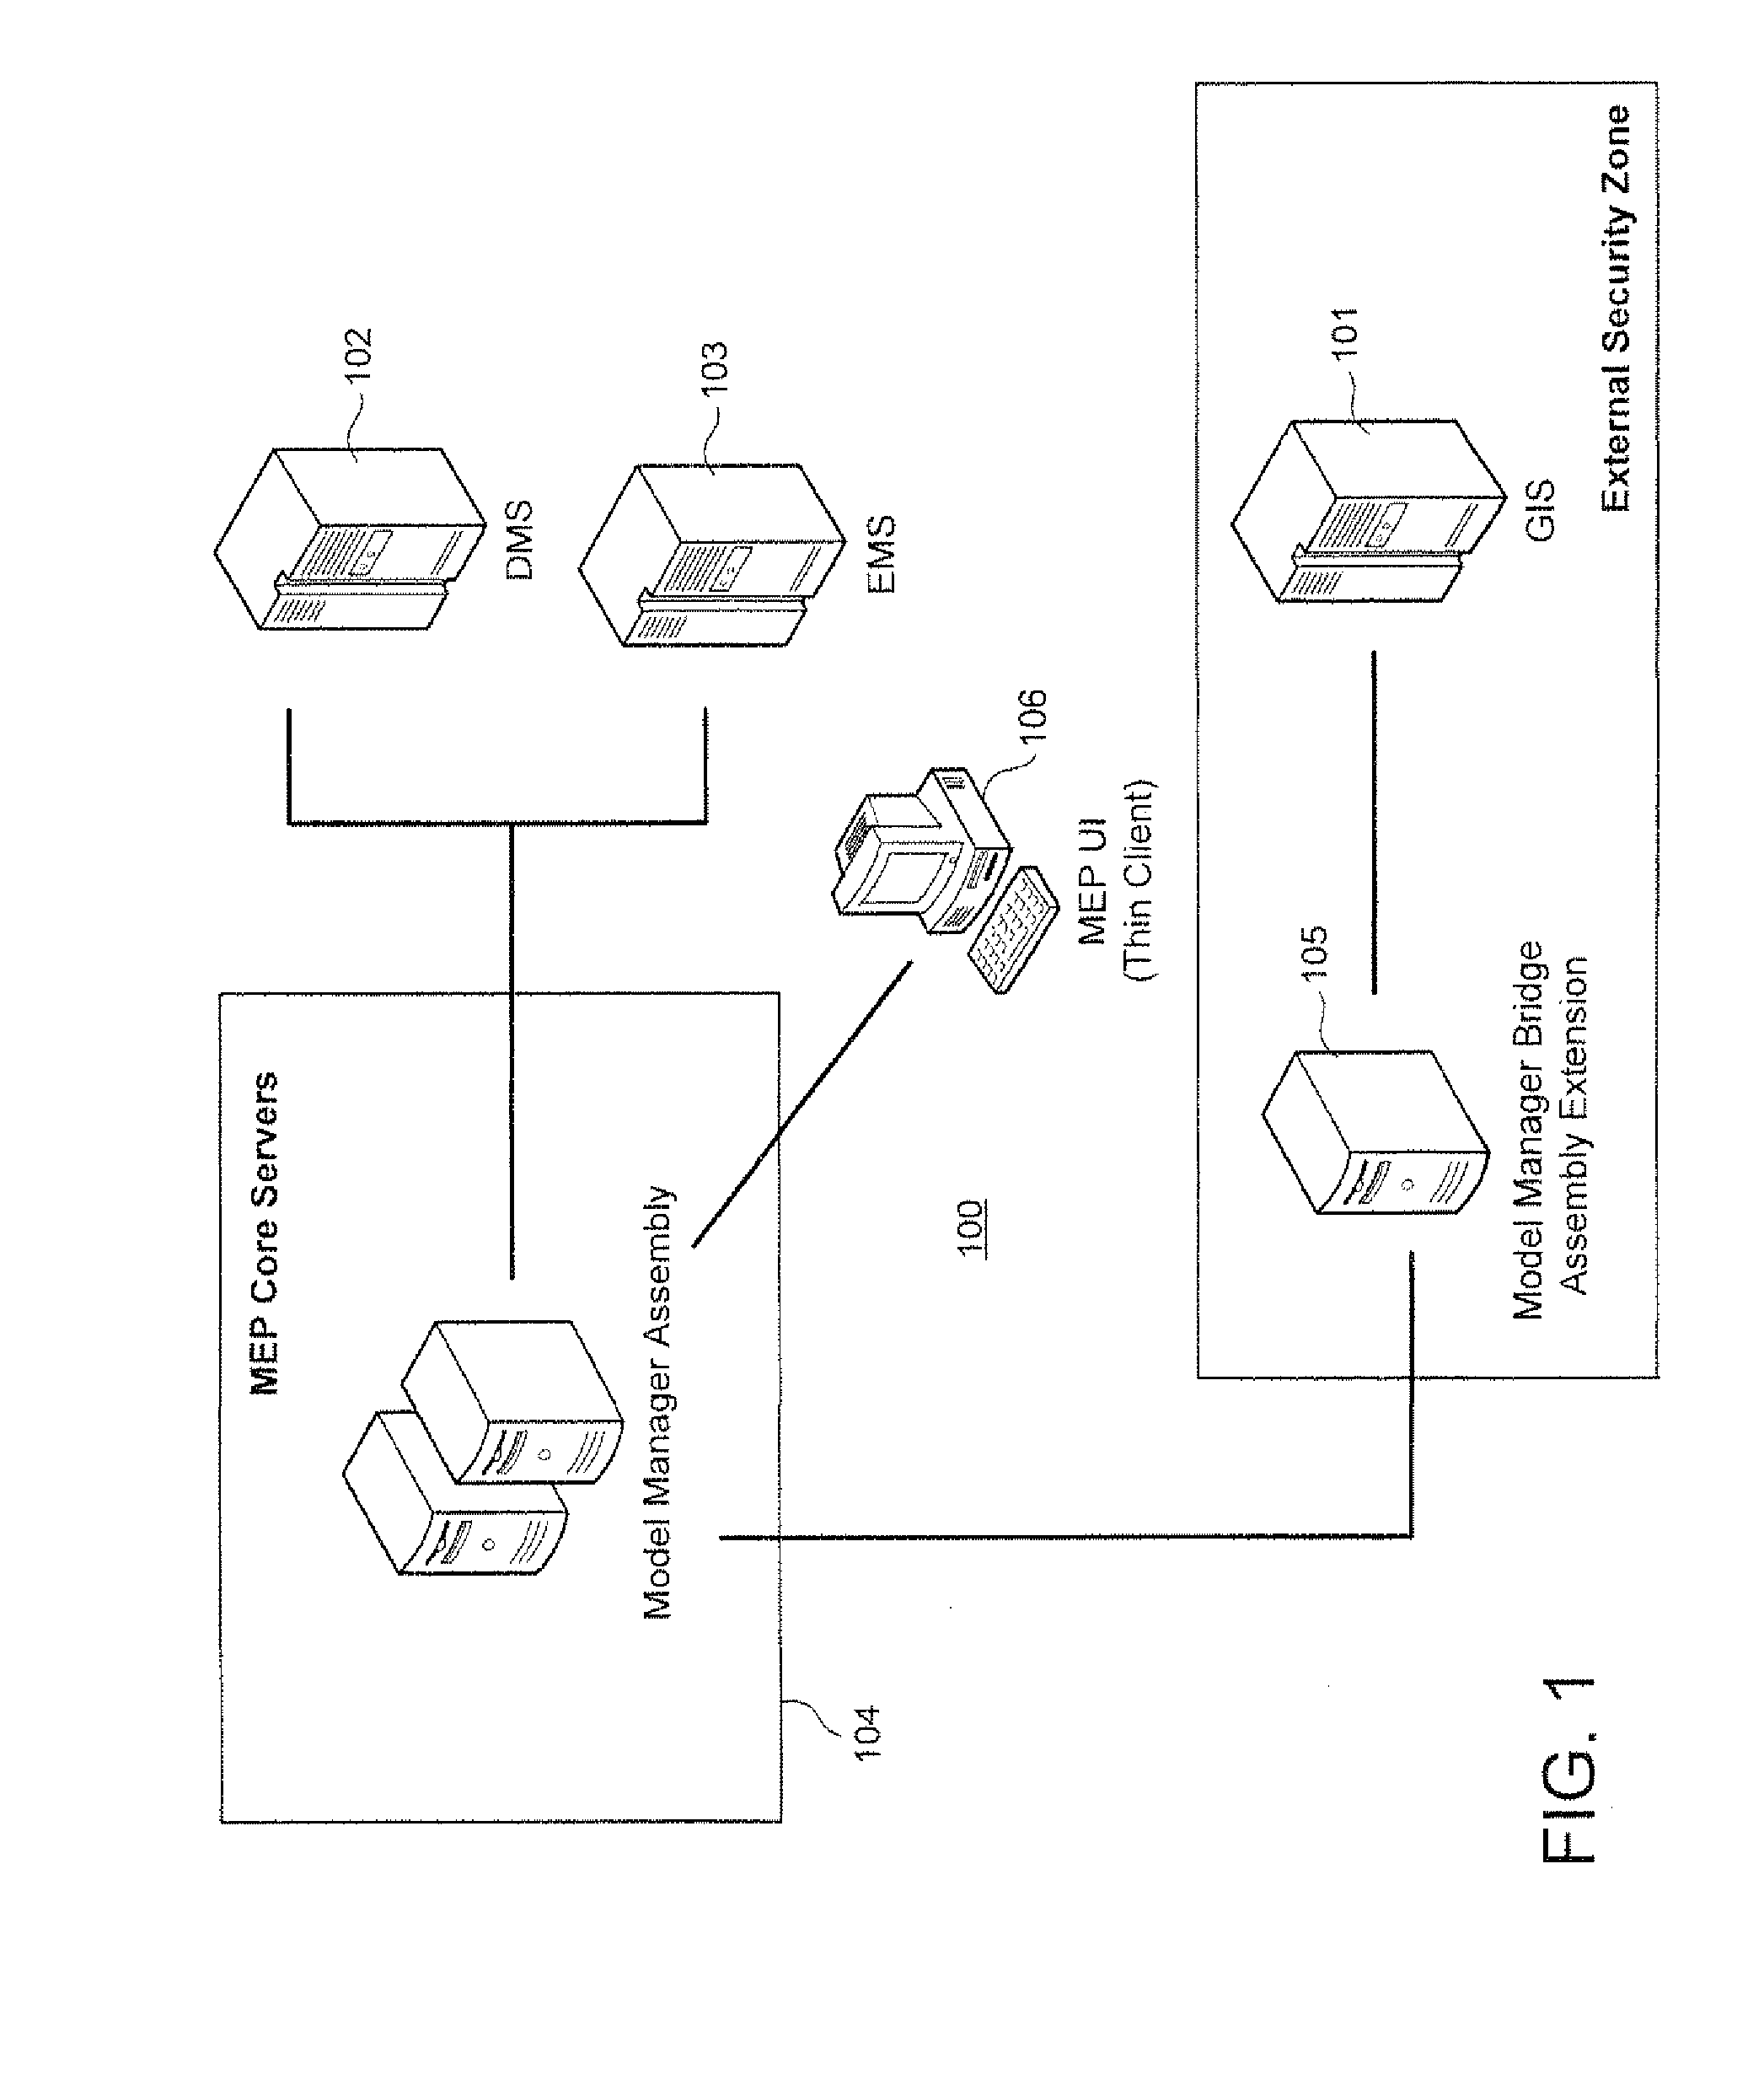 Method and program product for validation of circuit models for phase connectivity